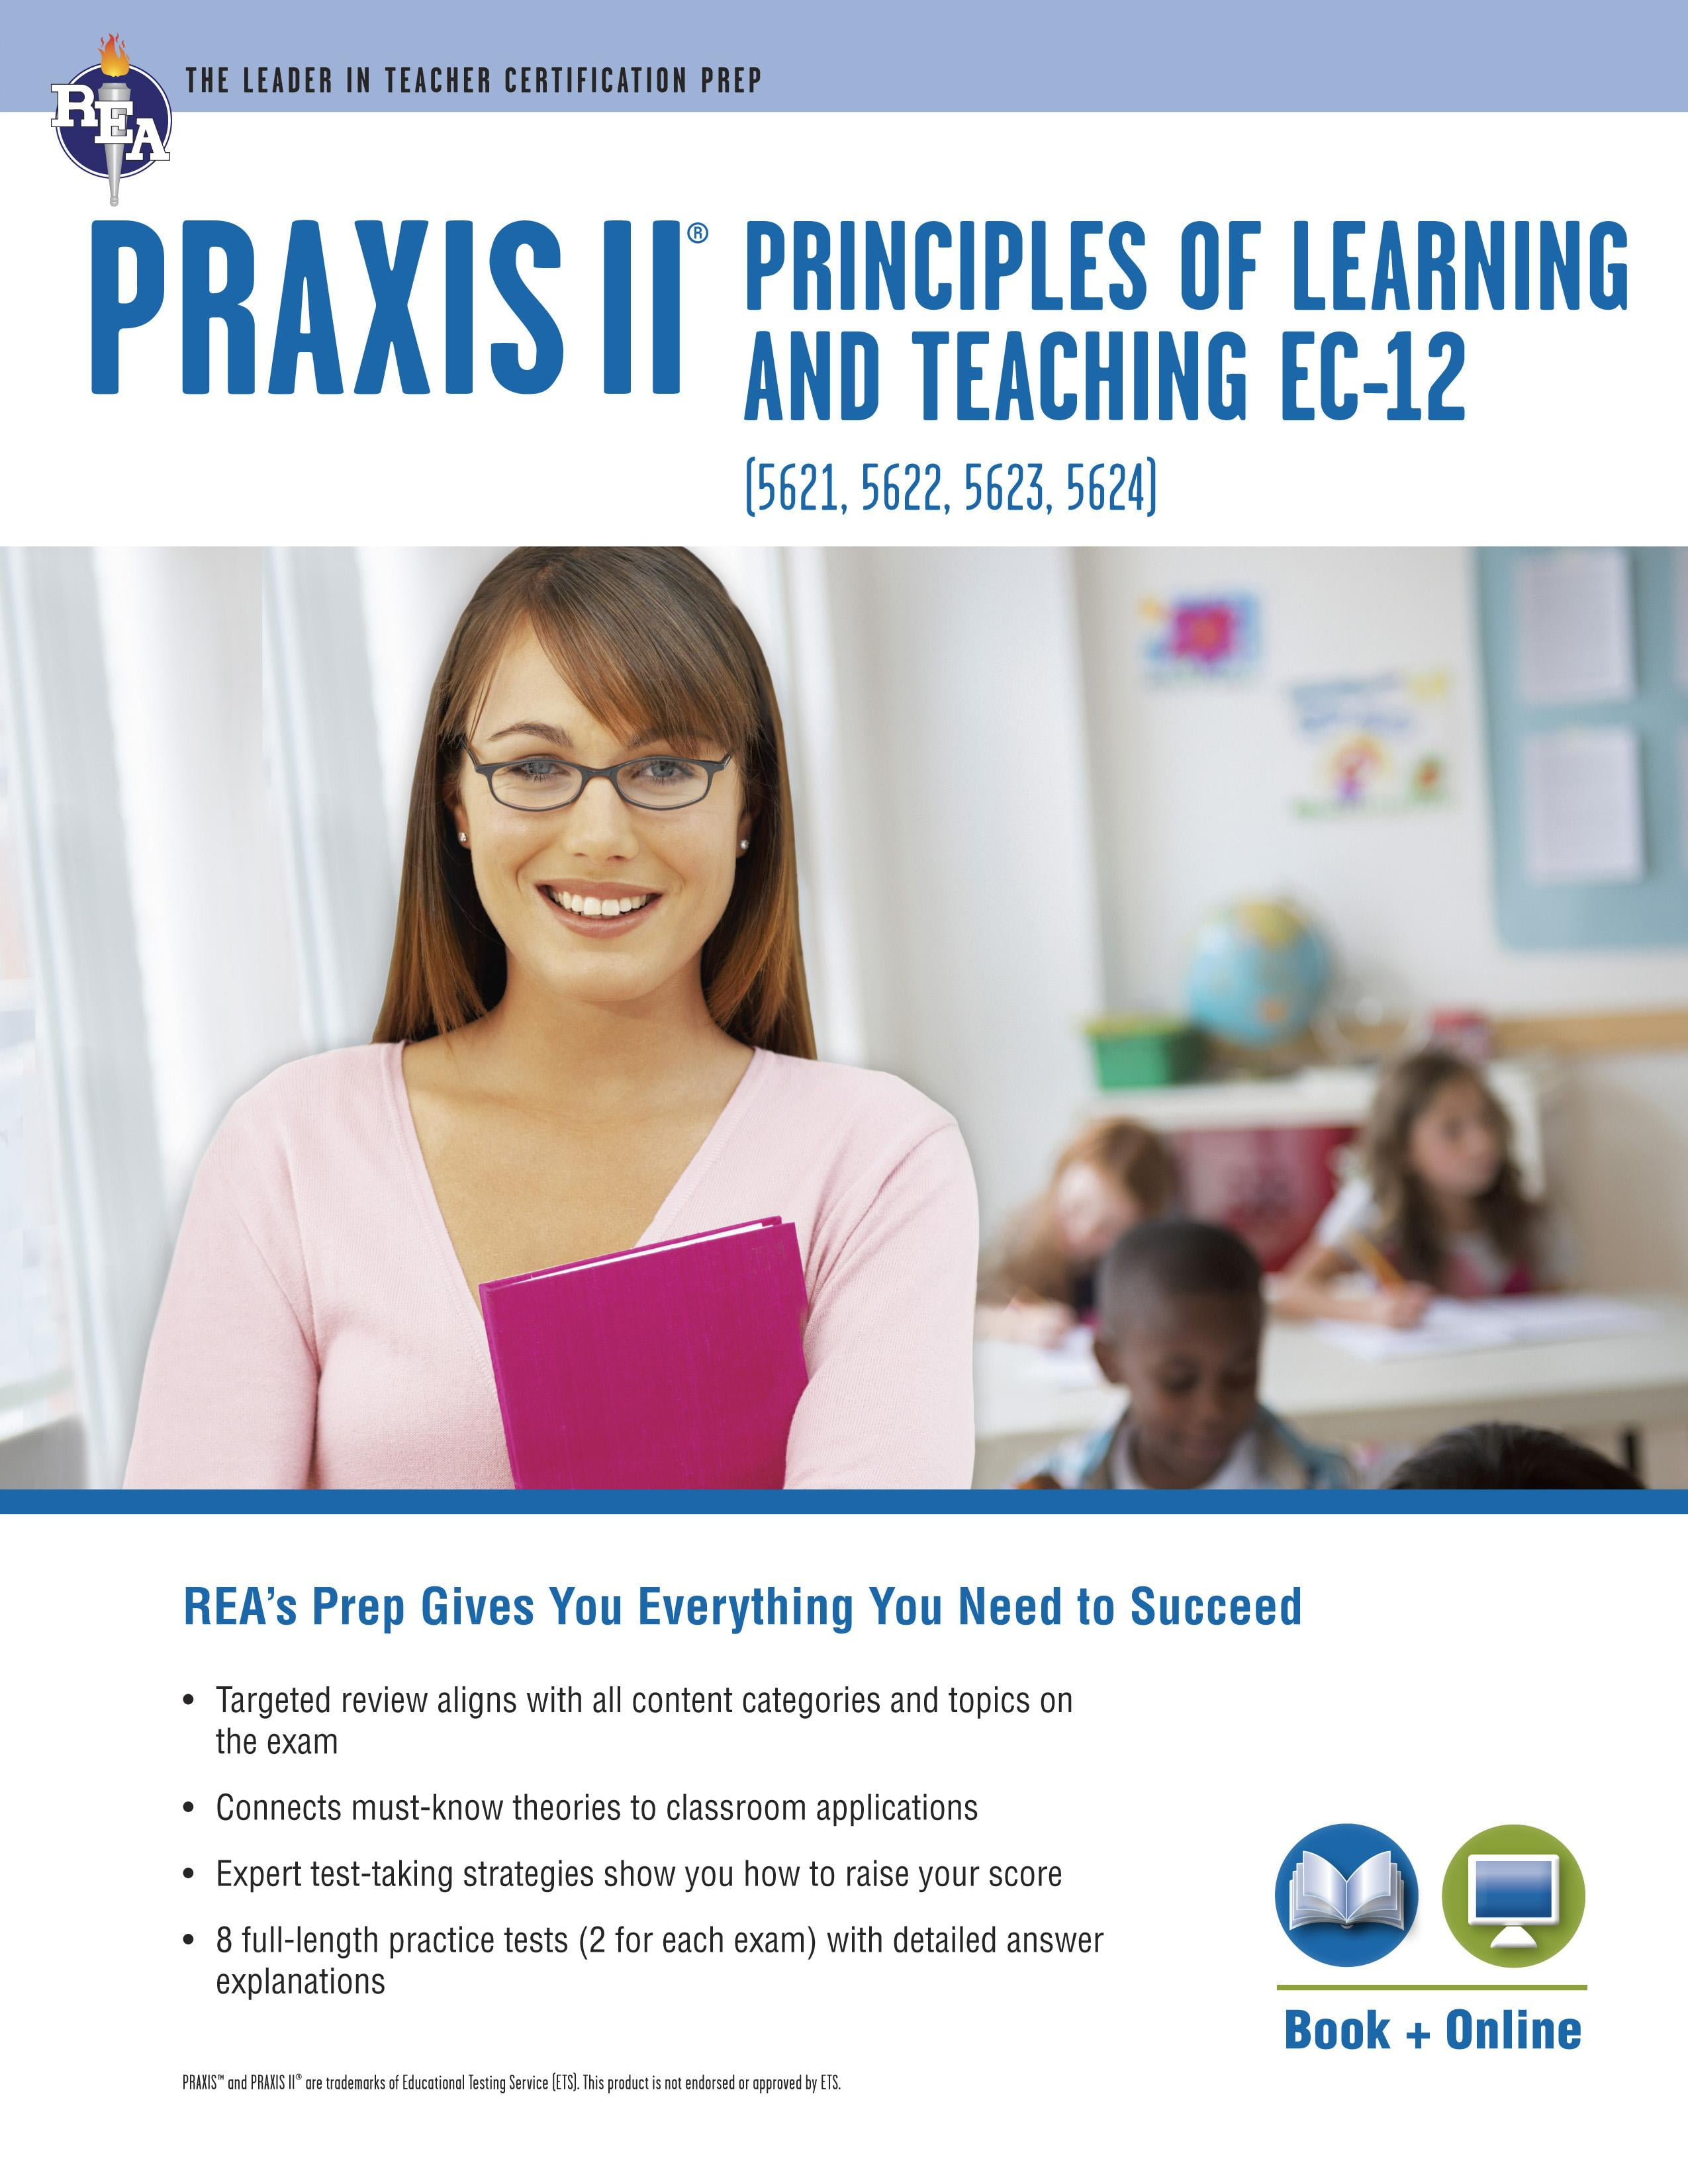 Test for teachers. The Praxis® Tests. Test-teach-Test картинка. The Praxis Learning.